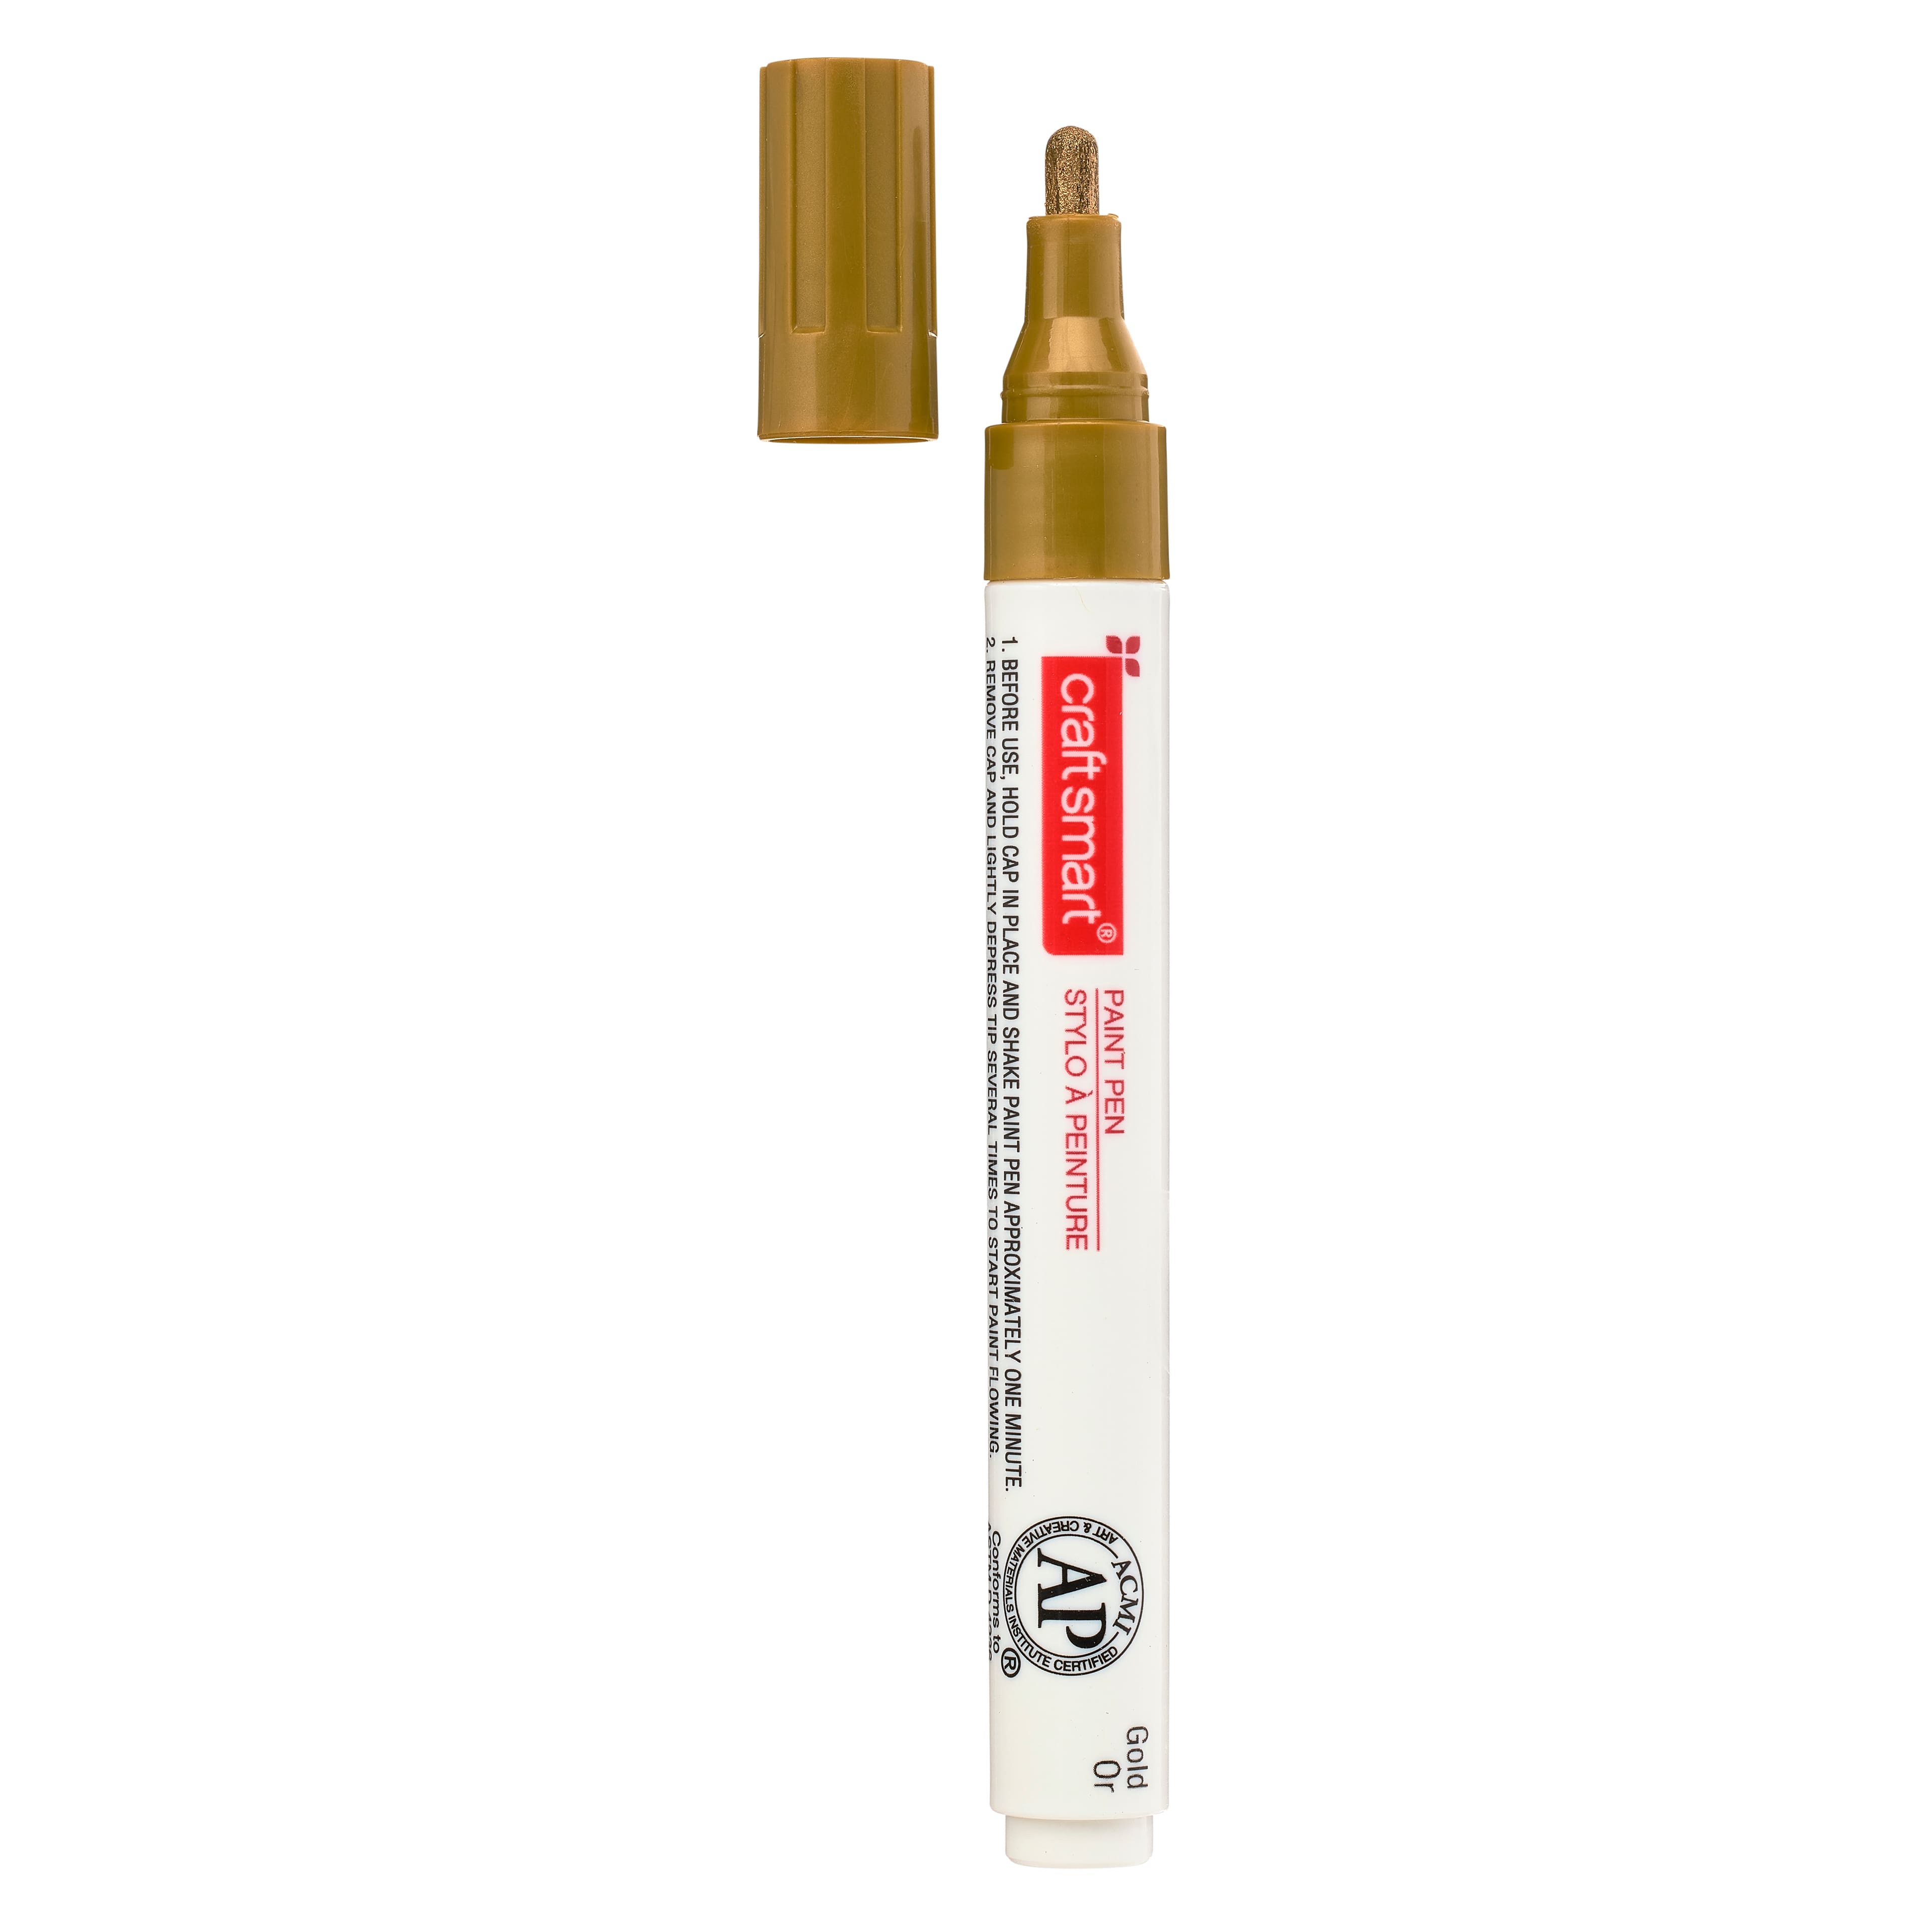 Broad Line Paint Pen by Craft Smart®